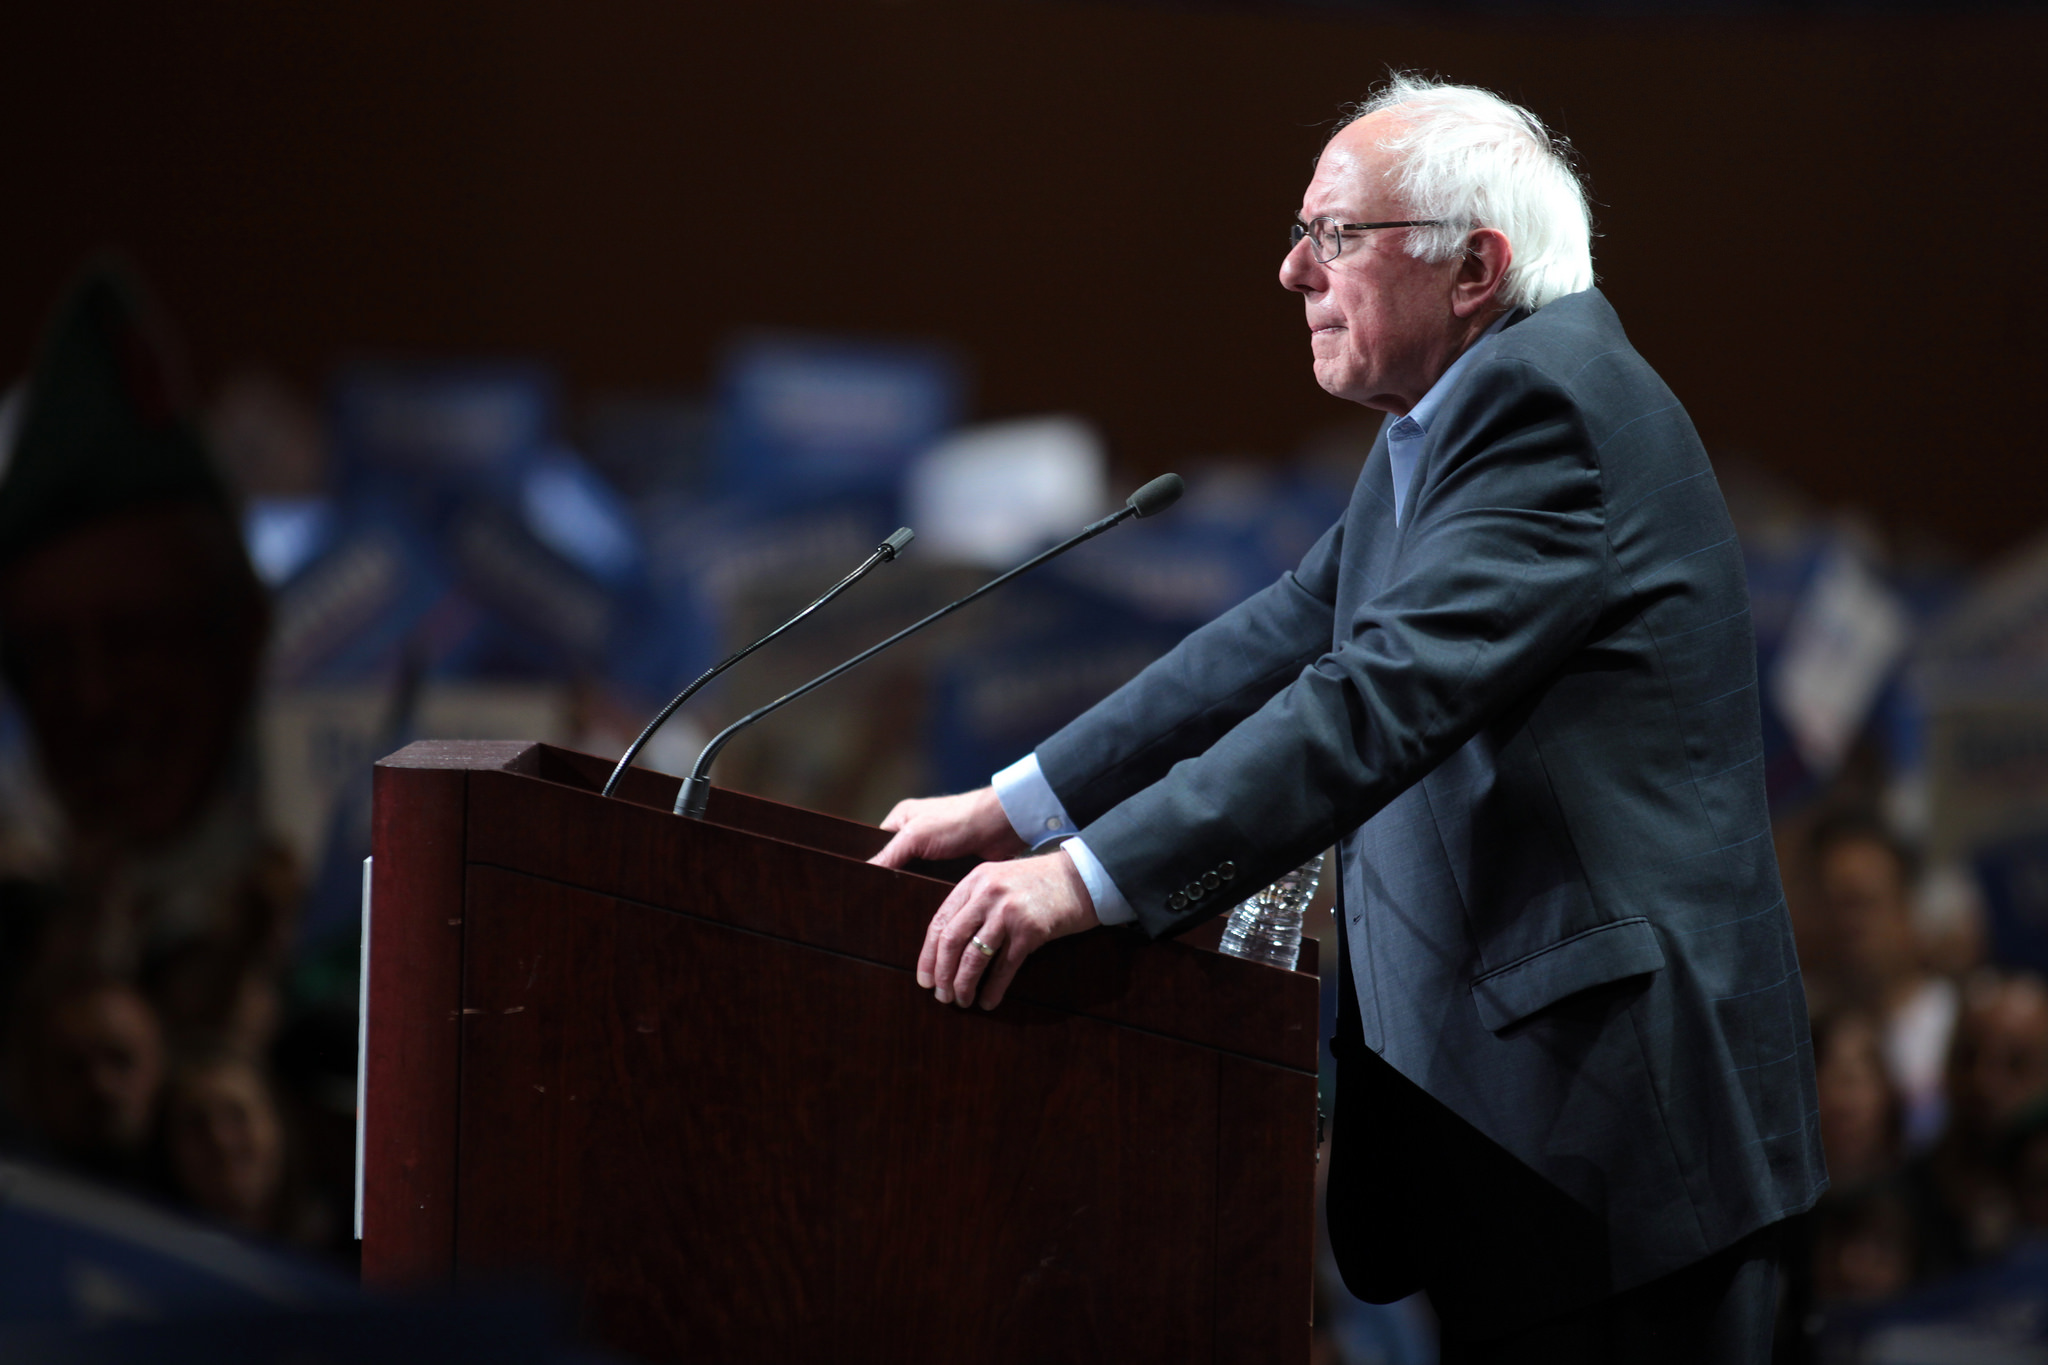 ‘No Wars for the Billionaire Class’: A look at a possible Sanders foreign policy